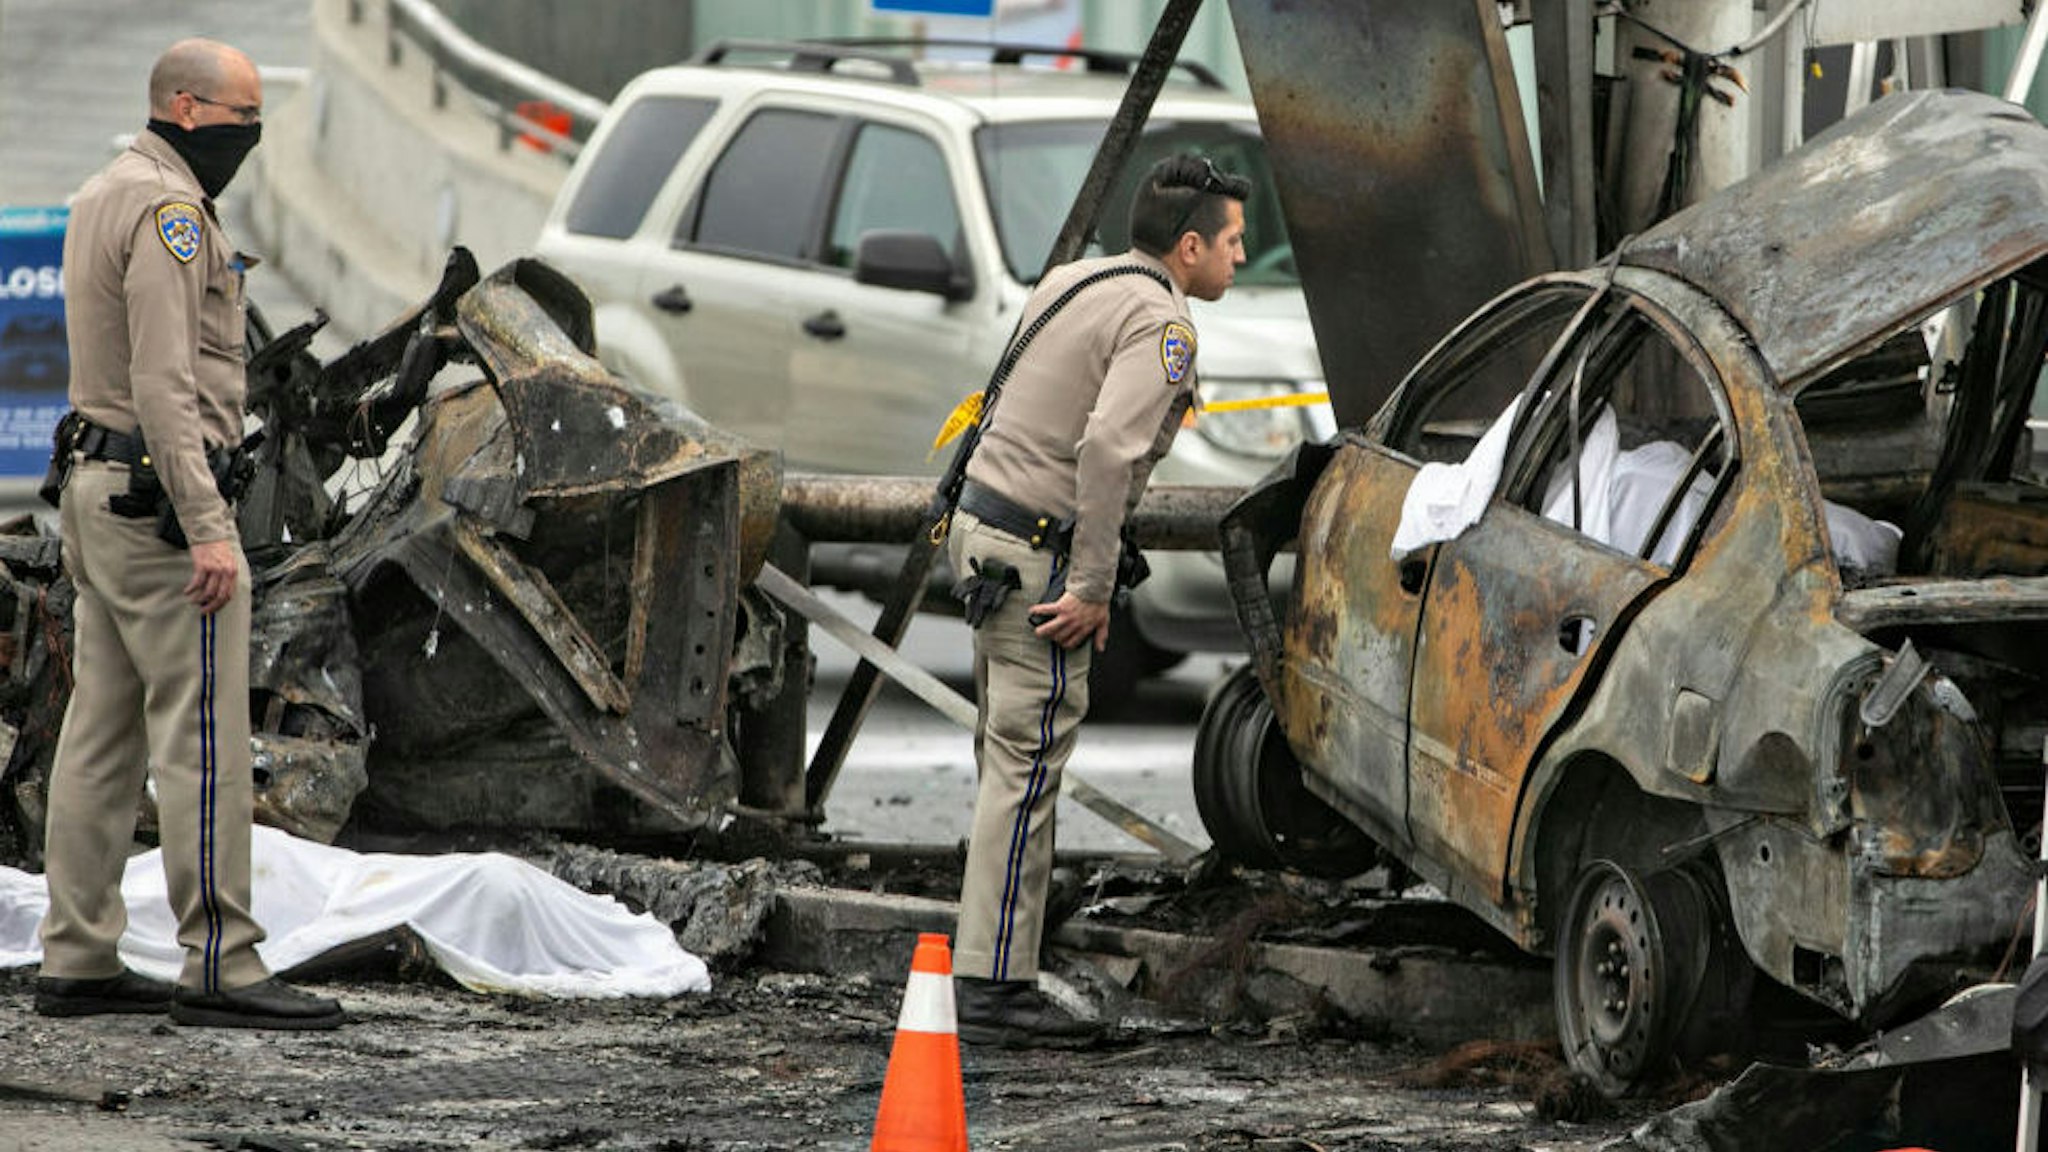 CHP and other officials investigate a fiery crash where multiple people were killed near a Windsor Hills gas station at the intersection of West Slauson and South La Brea avenues on Thursday, Aug. 4, 2022 in Los Angeles, CA.